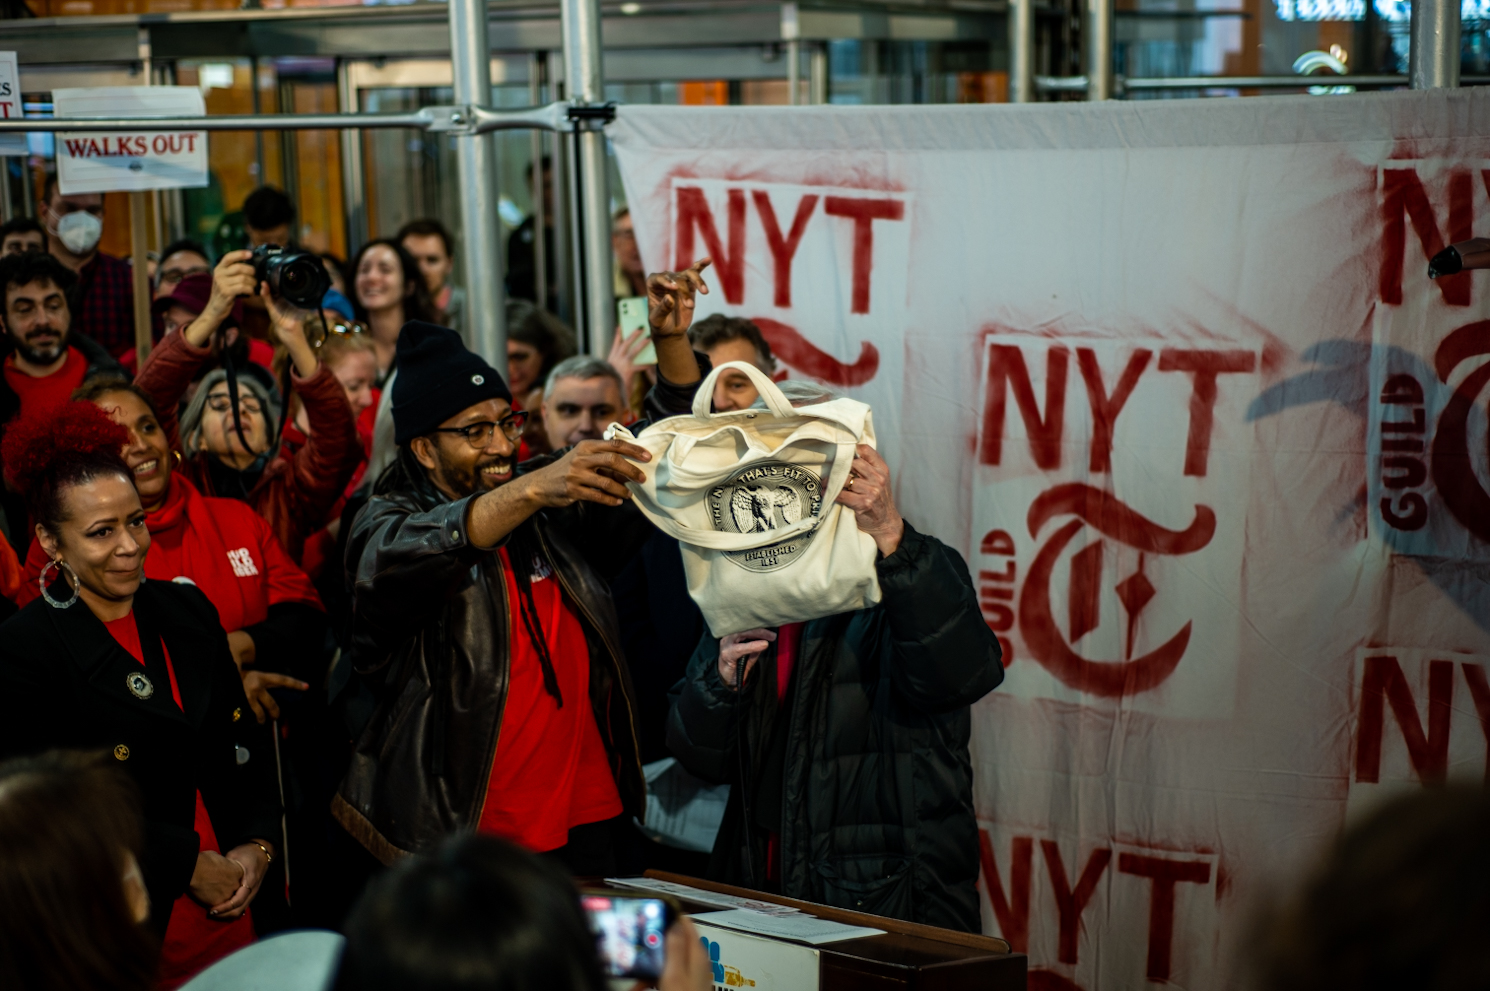 A speaker standing at a podium and a man next to him holding a New York Times tote bag. The New York Times logo and a crowd are behind them.